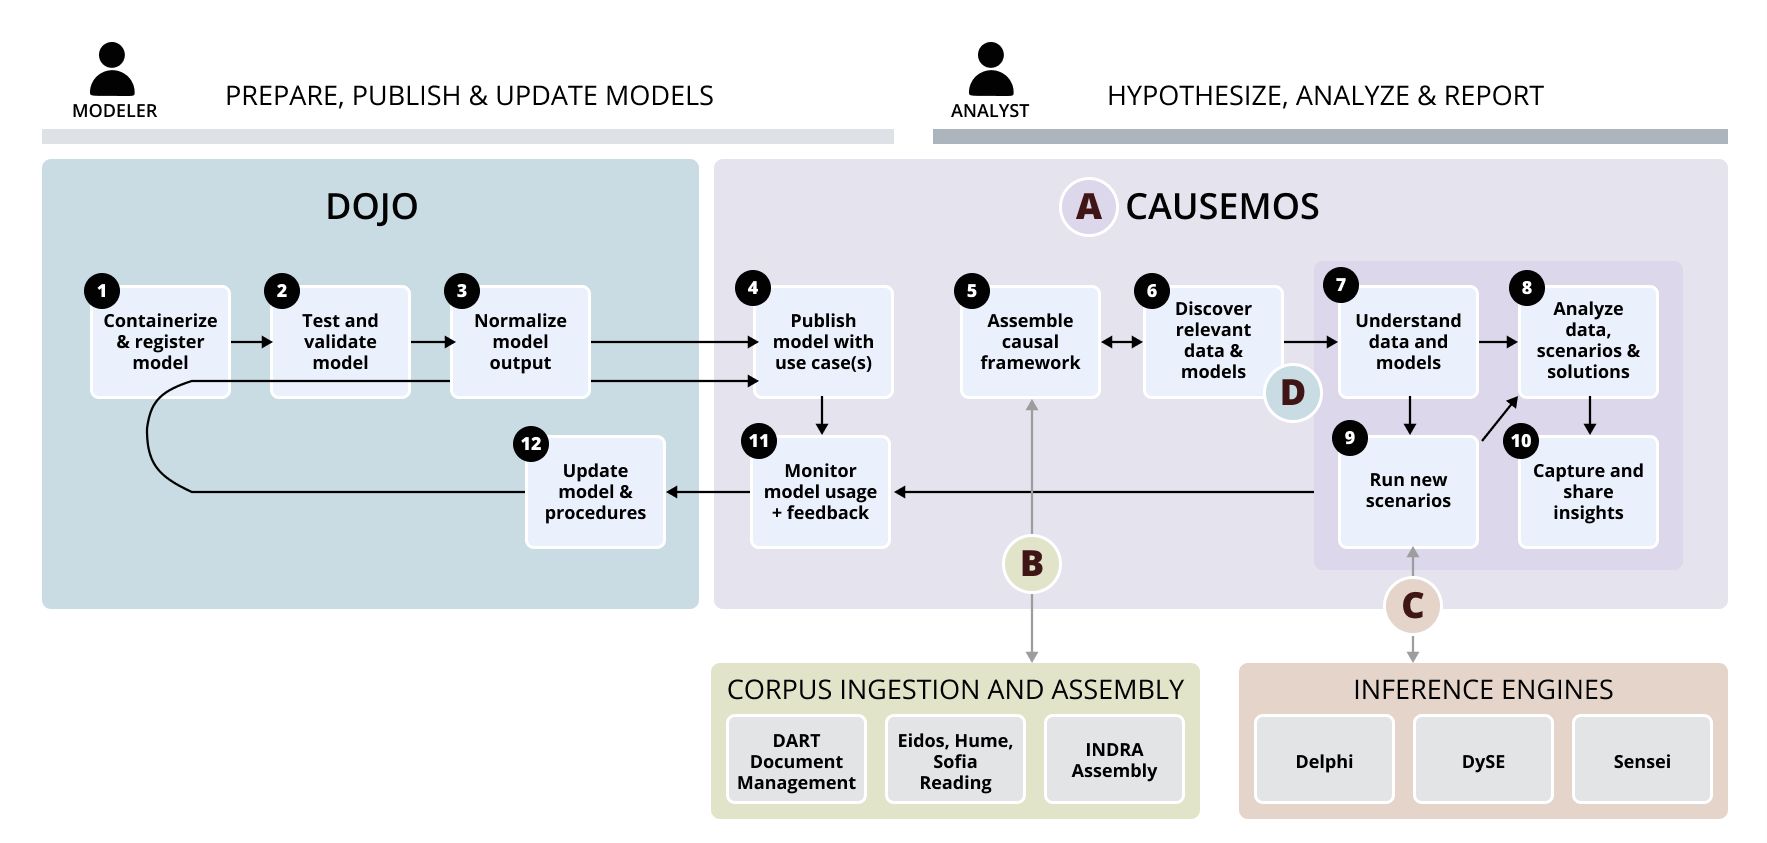 Modeler and analyst workflows across the various World Modelers systems